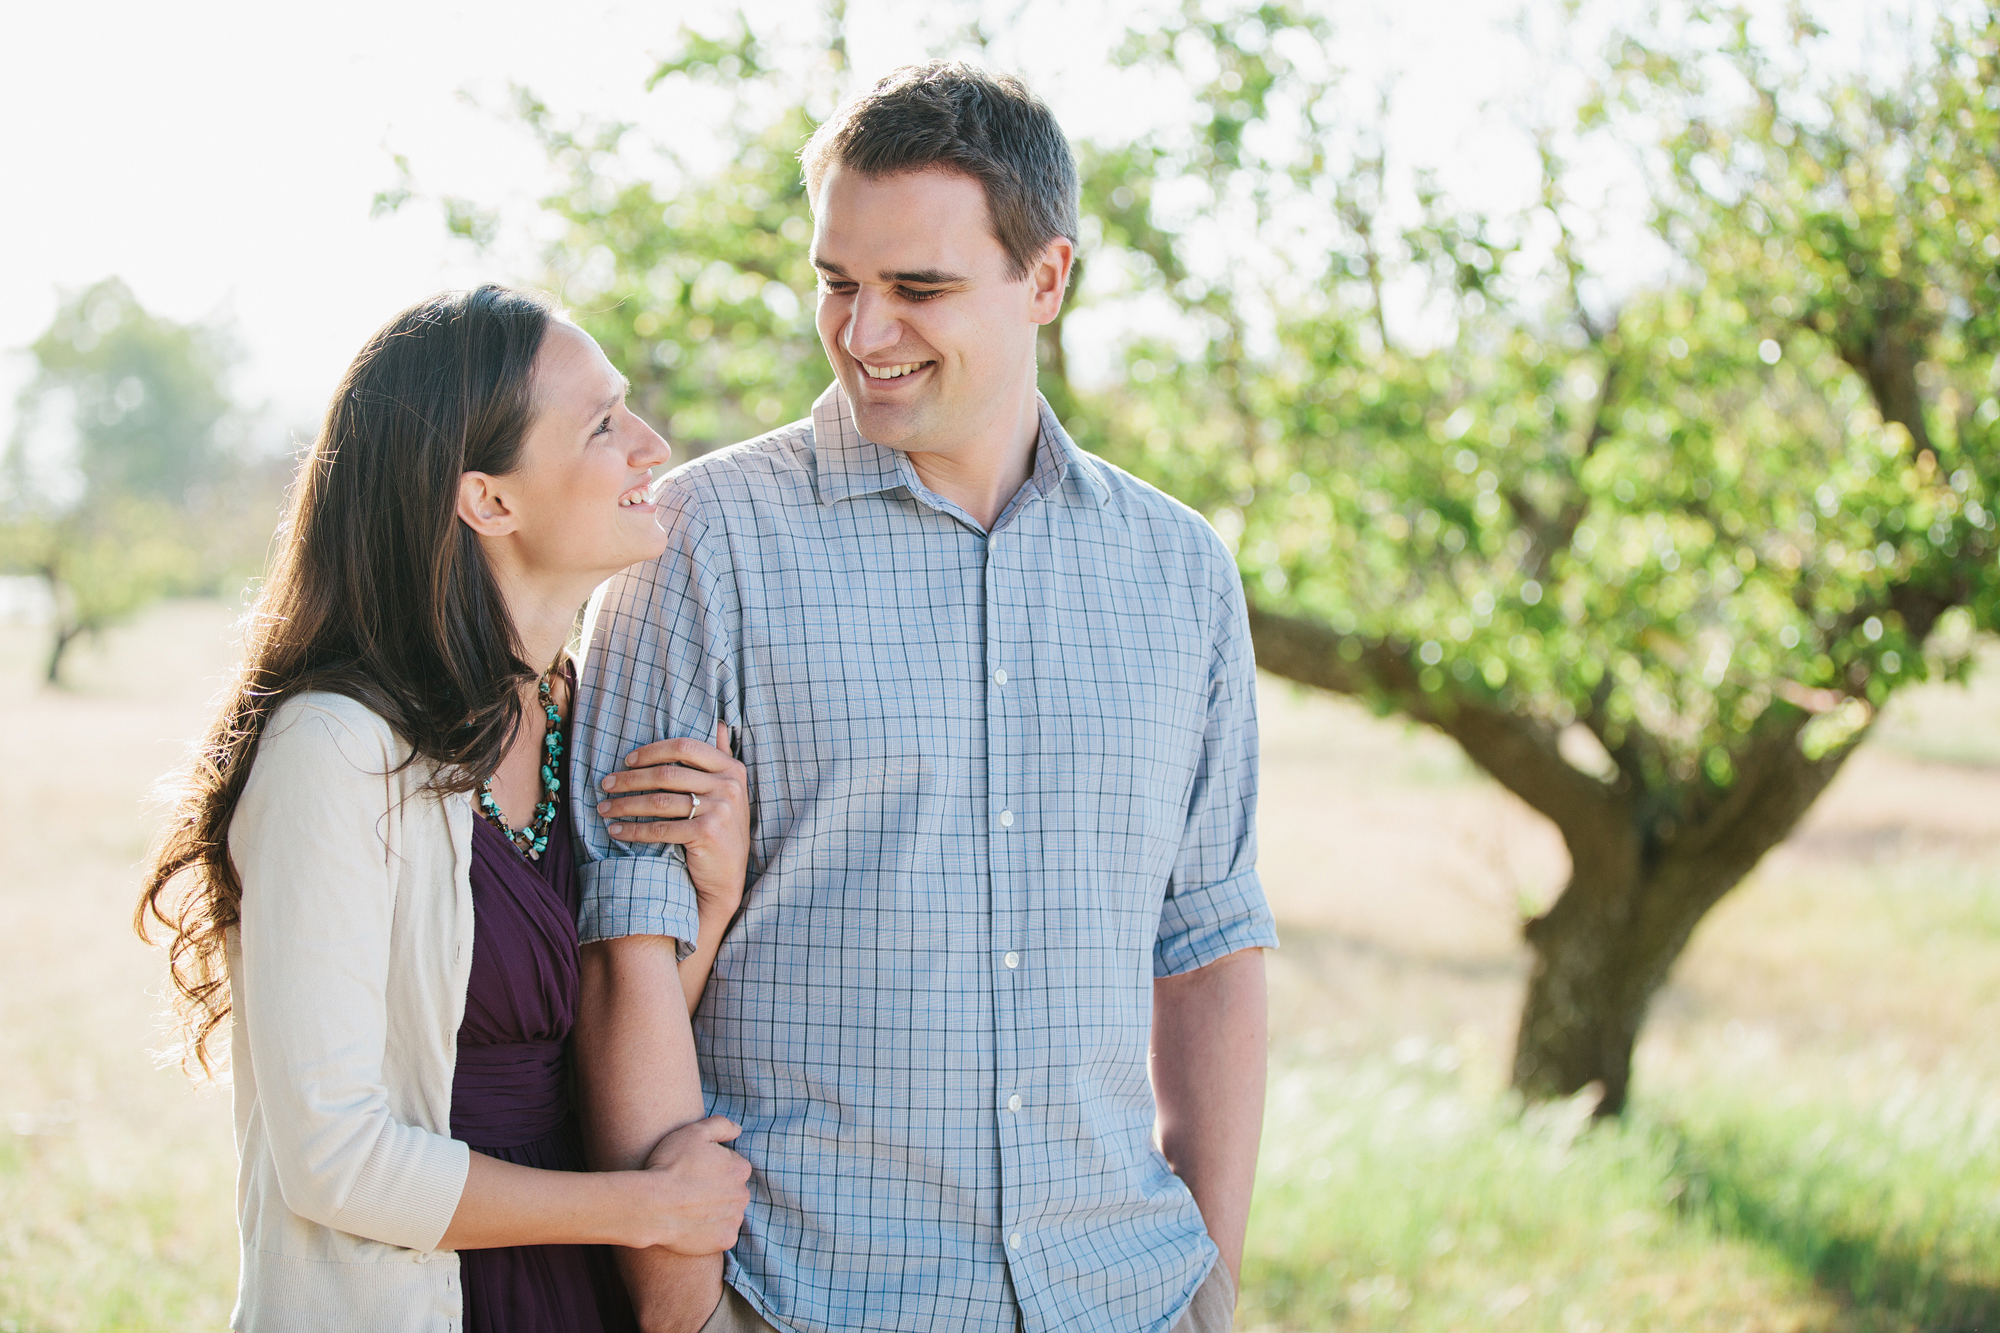 Ojai Valley Engagement Session